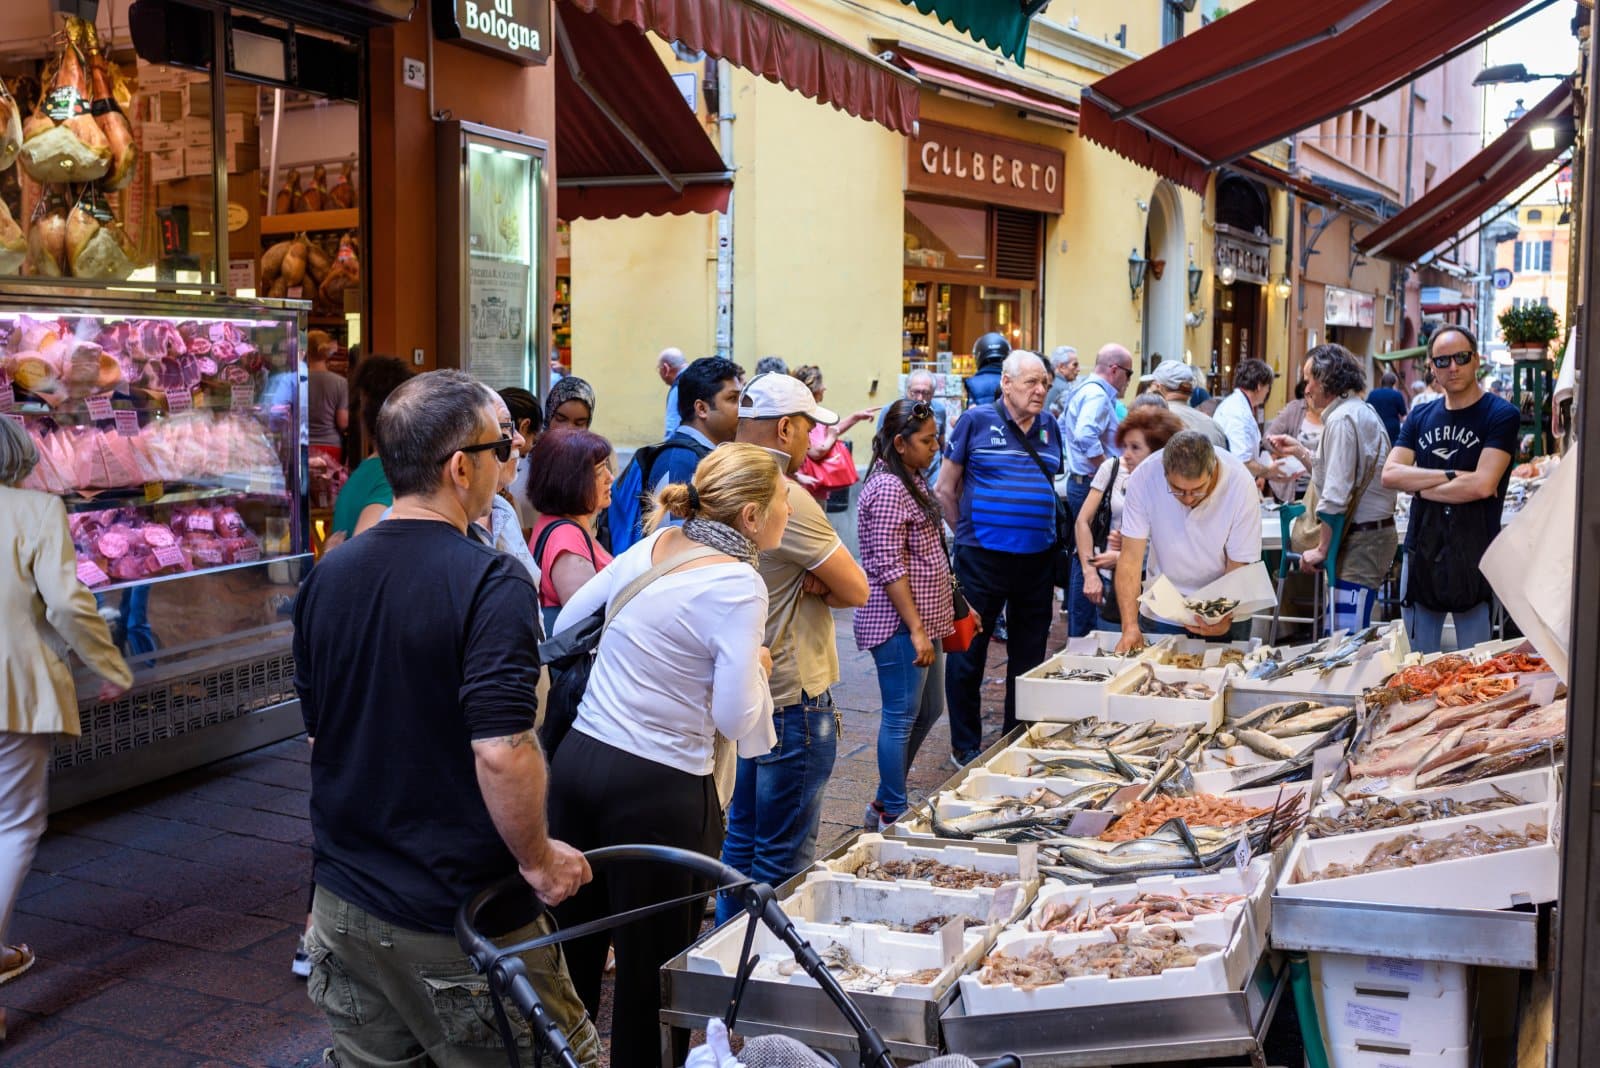 <p class="wp-caption-text">Image Credit: Shutterstock / Stramp</p>  <p><span>While you are out and about, you’ll notice that Bologna’s shopping scene is as diverse as its culinary offerings. Via Pescherie Vecchie is the heart of Bologna’s shopping, especially for food enthusiasts. This historic street has traditional shops selling fresh produce, pasta, meats, and cheeses. It’s a vibrant display of Bologna’s gastronomic richness, offering an opportunity to taste and purchase local specialties like mortadella, Parmigiano Reggiano, and the most divine balsamic vinegar. </span></p>